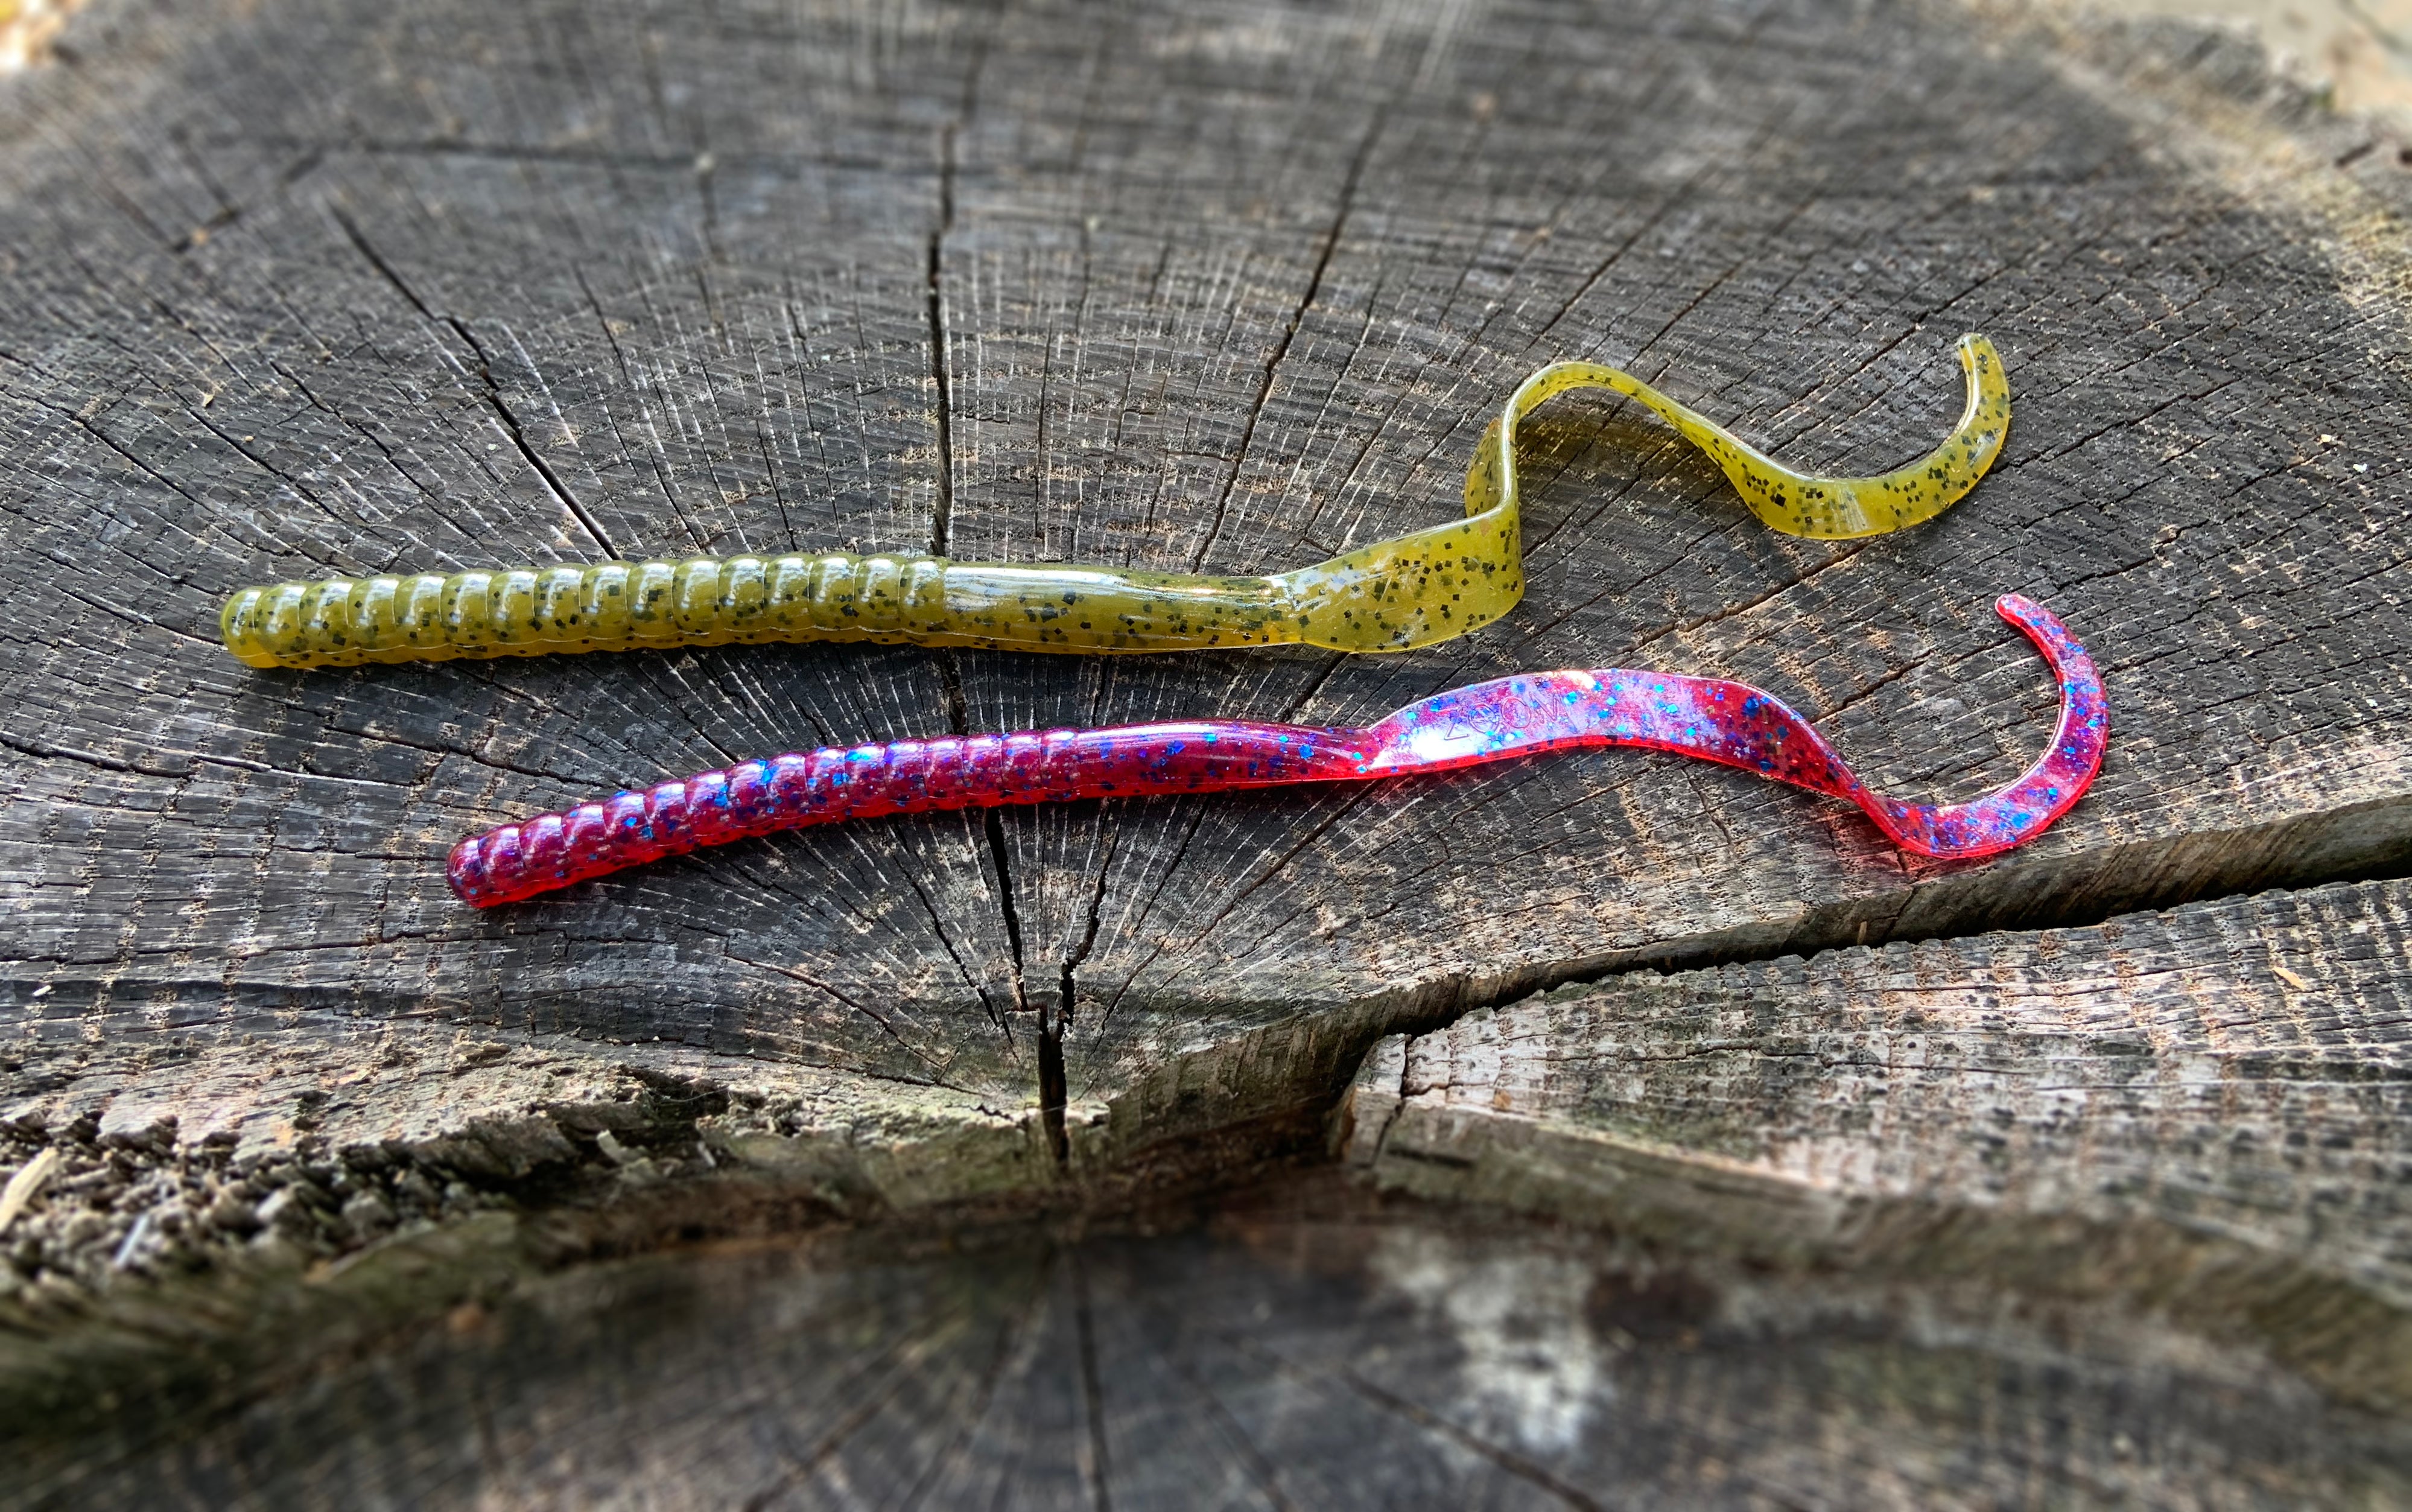 Zoom Trick Worm Straight Tail 6.5 20pk, Choice of Colors